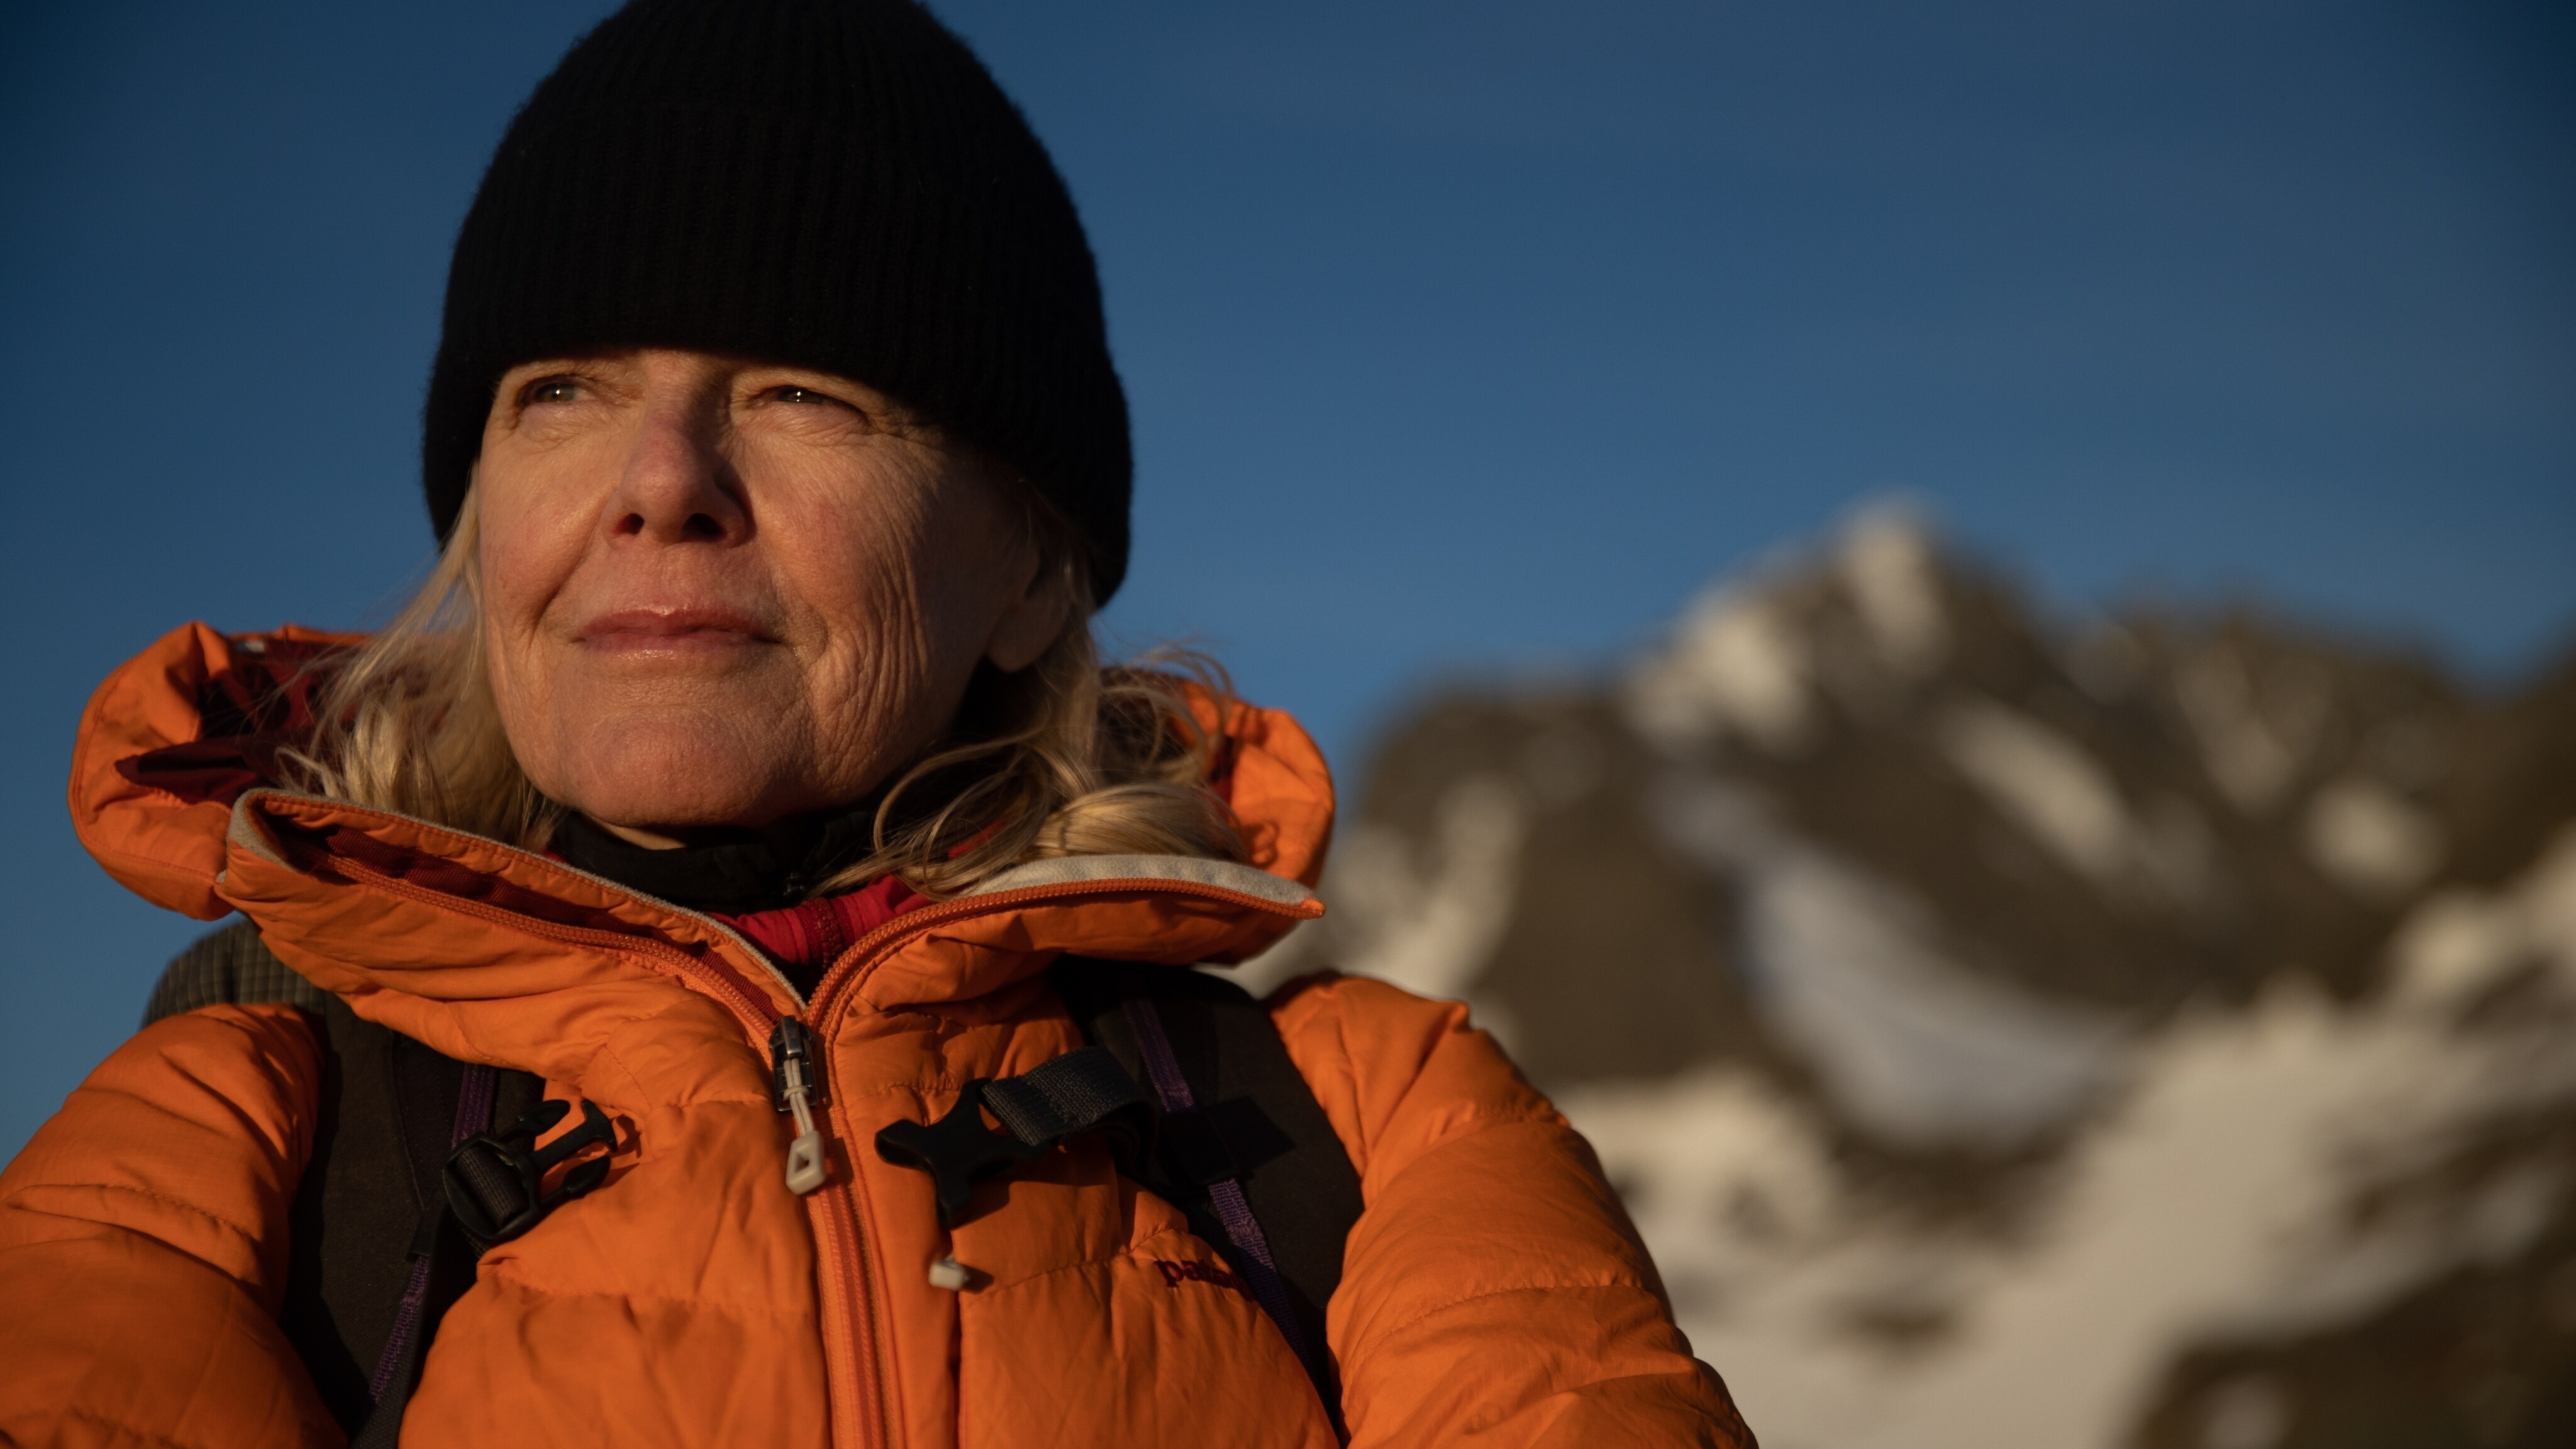 Kris Tompkins, gives a self-reflective and determined gaze as a Chilean sunset illuminates her face. (Jimmy Chin)